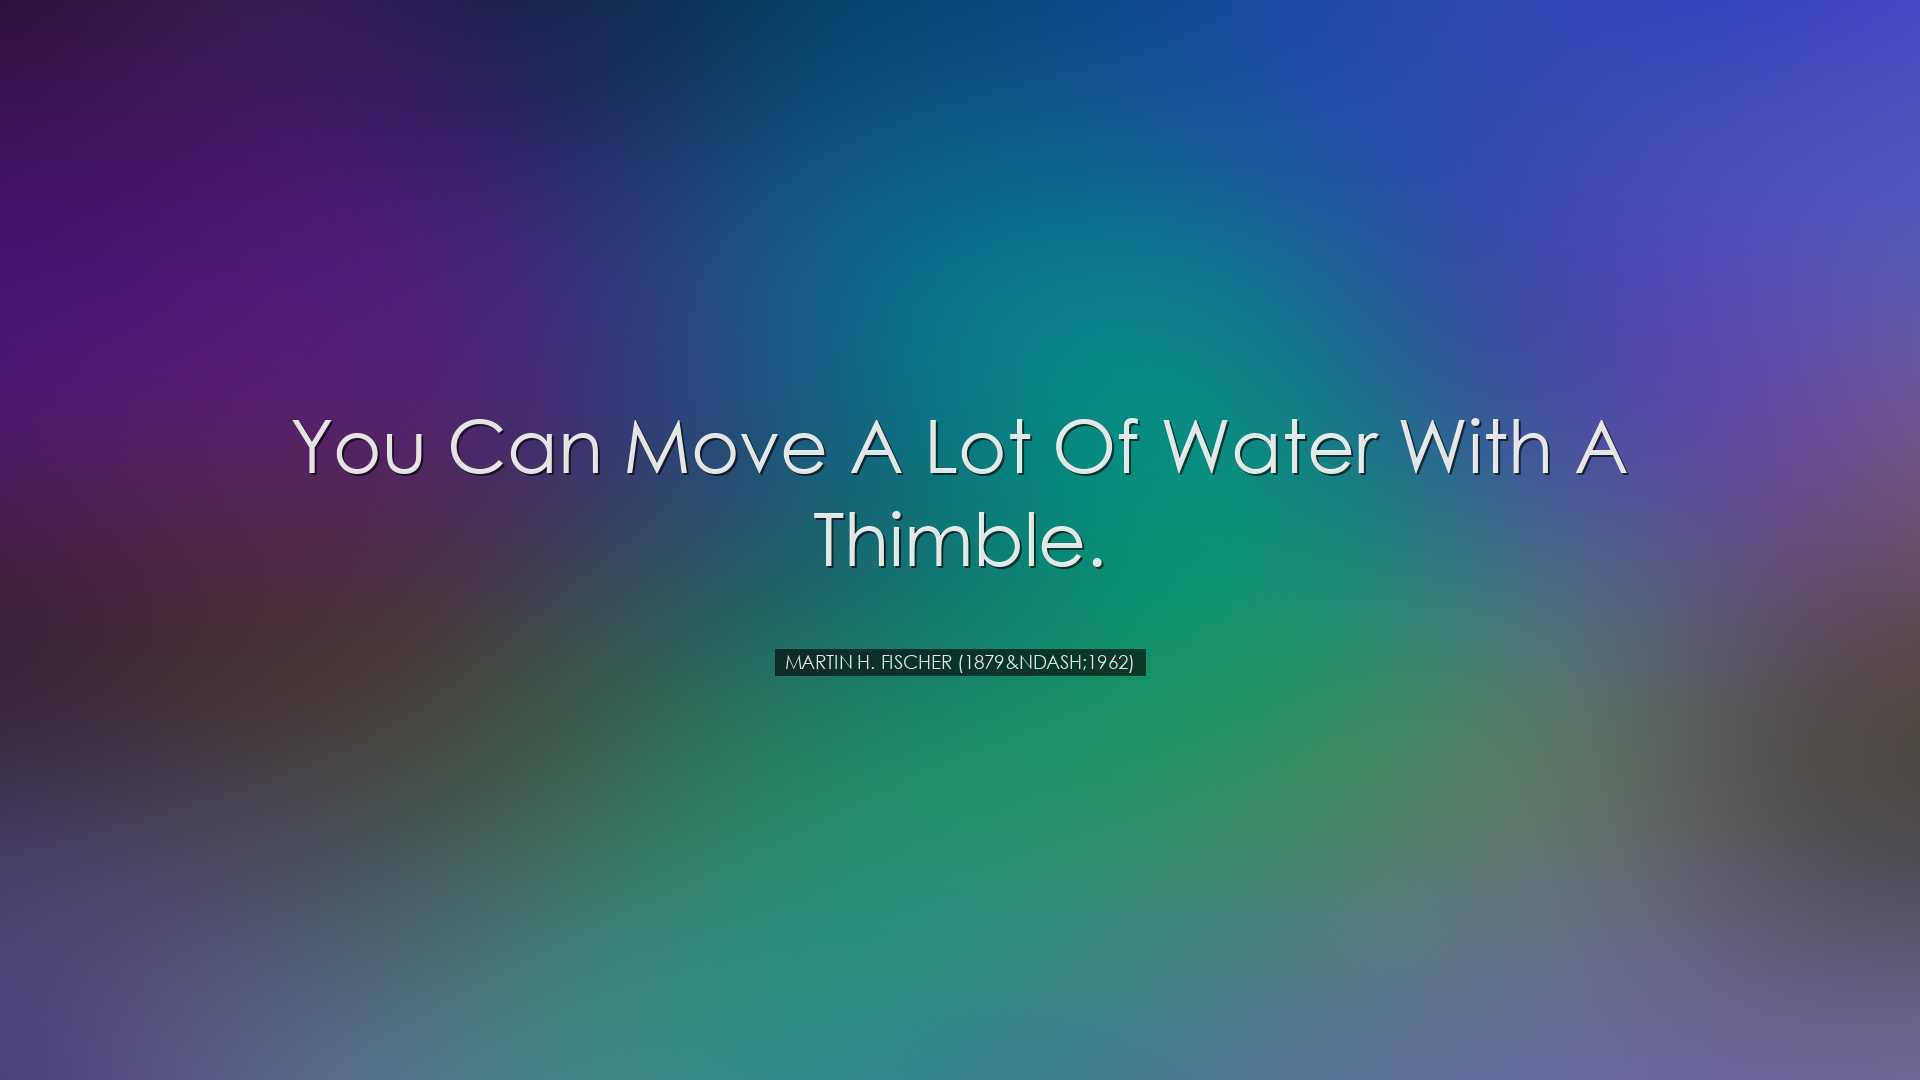 You can move a lot of water with a thimble. - Martin H. Fischer (1